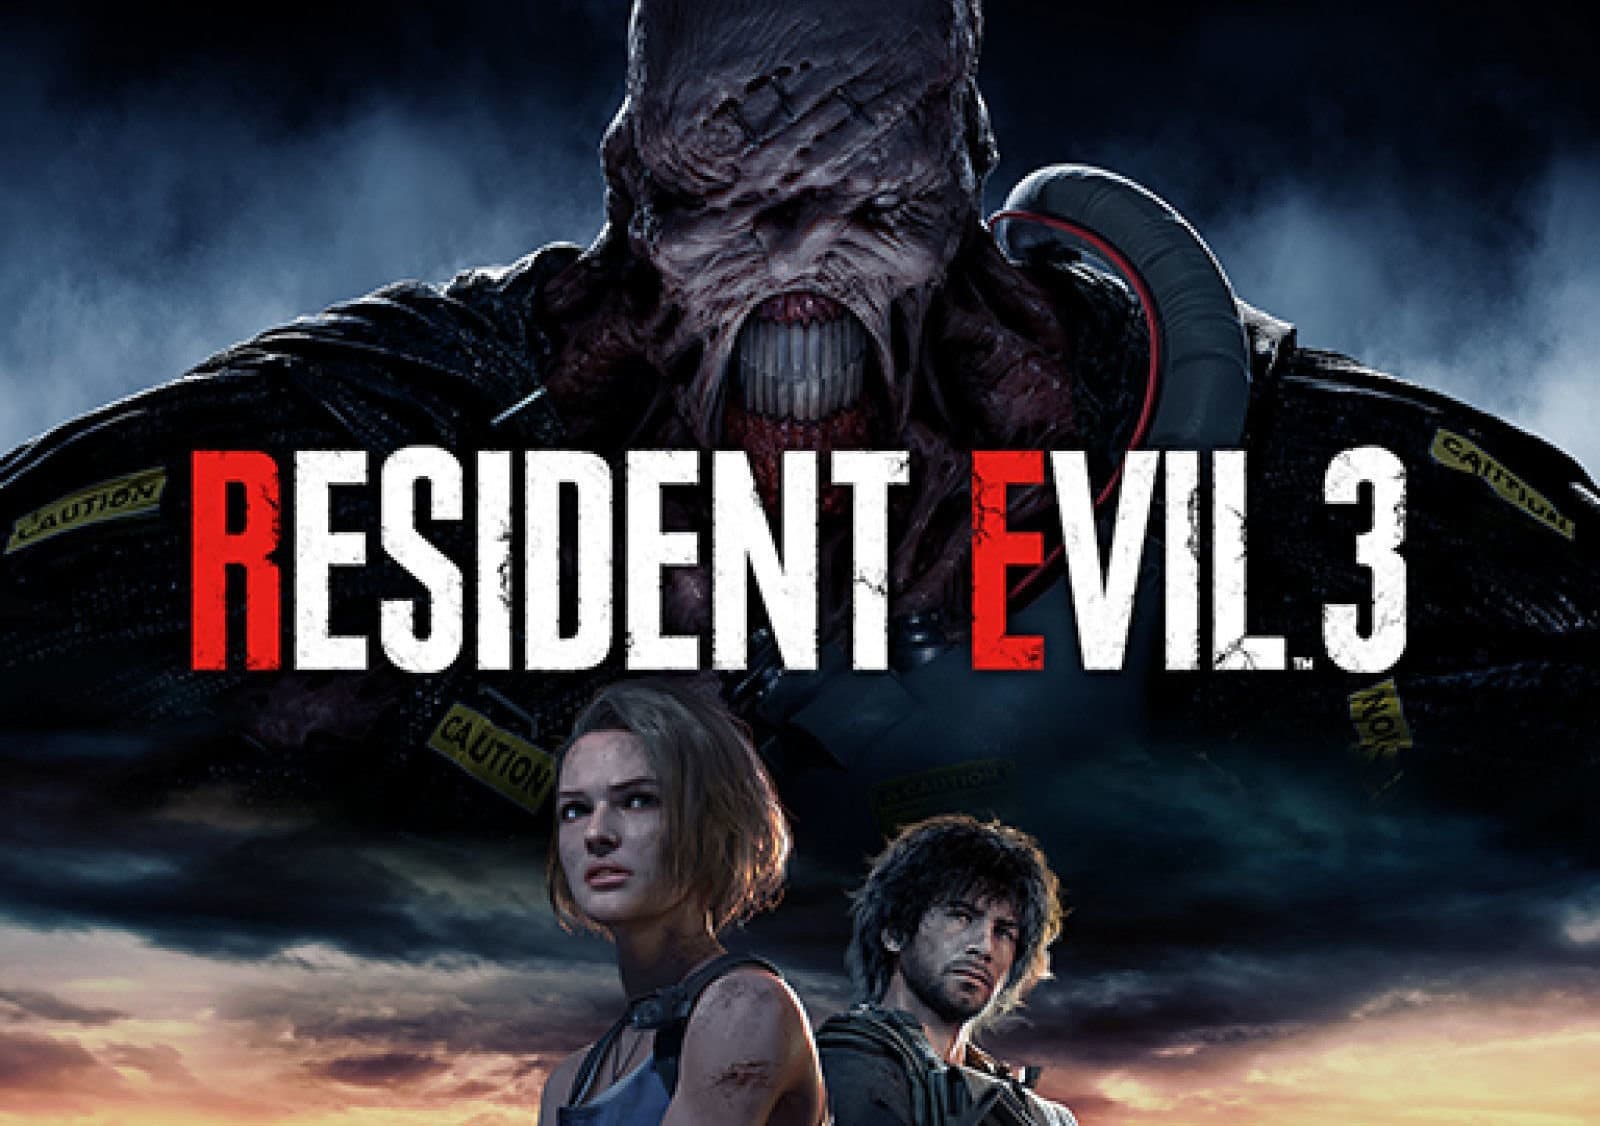 Resident Evil 3 Remake Officially Announced, Release Date Revealed